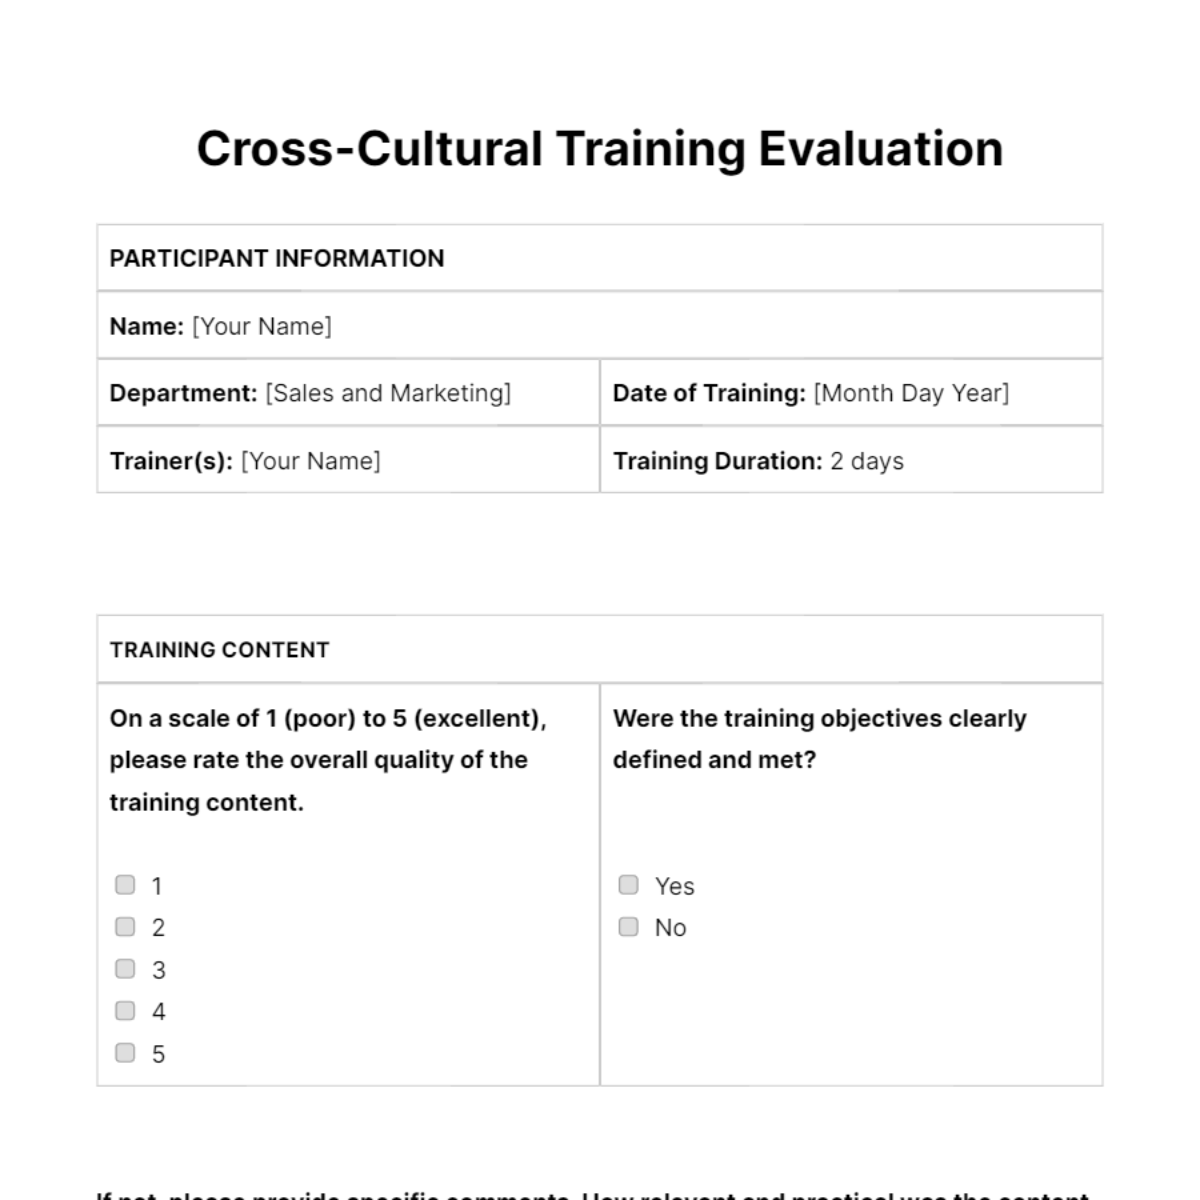 Cross-Cultural Training Evaluation HR Template